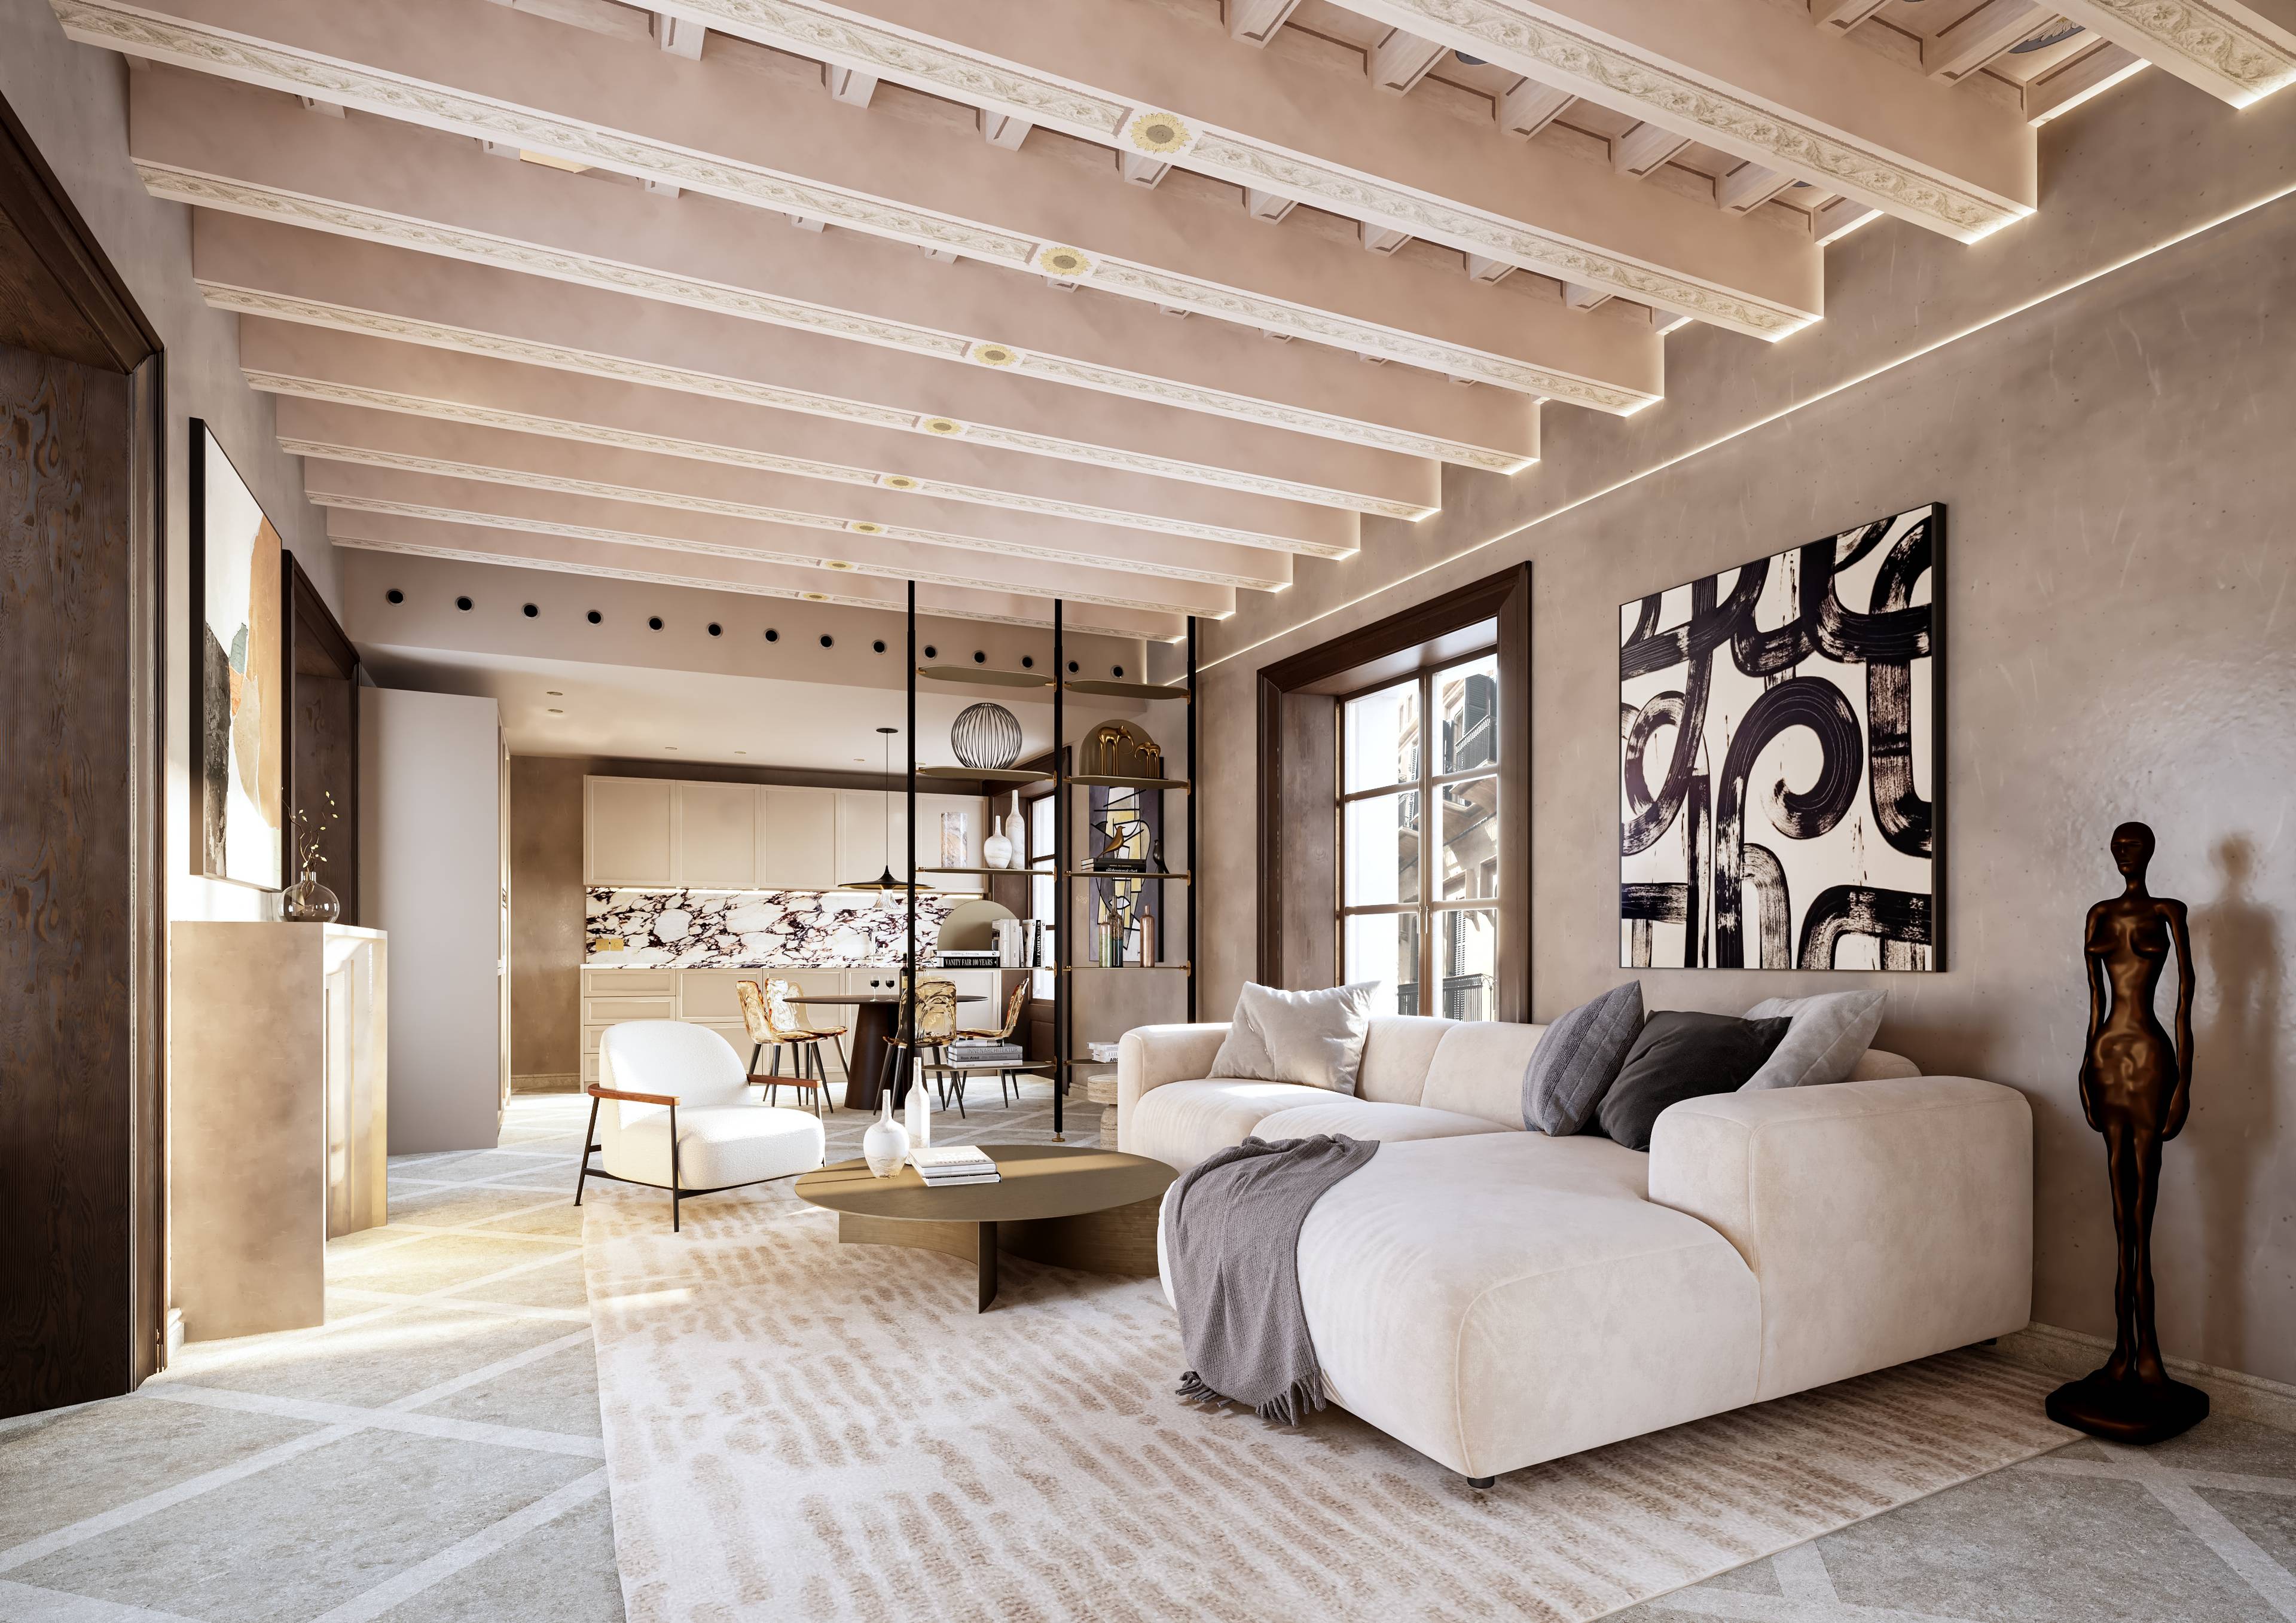 Exclusive and Contemporary luxury Penthouse in the middle of the heart medieval Palma de Mallorca